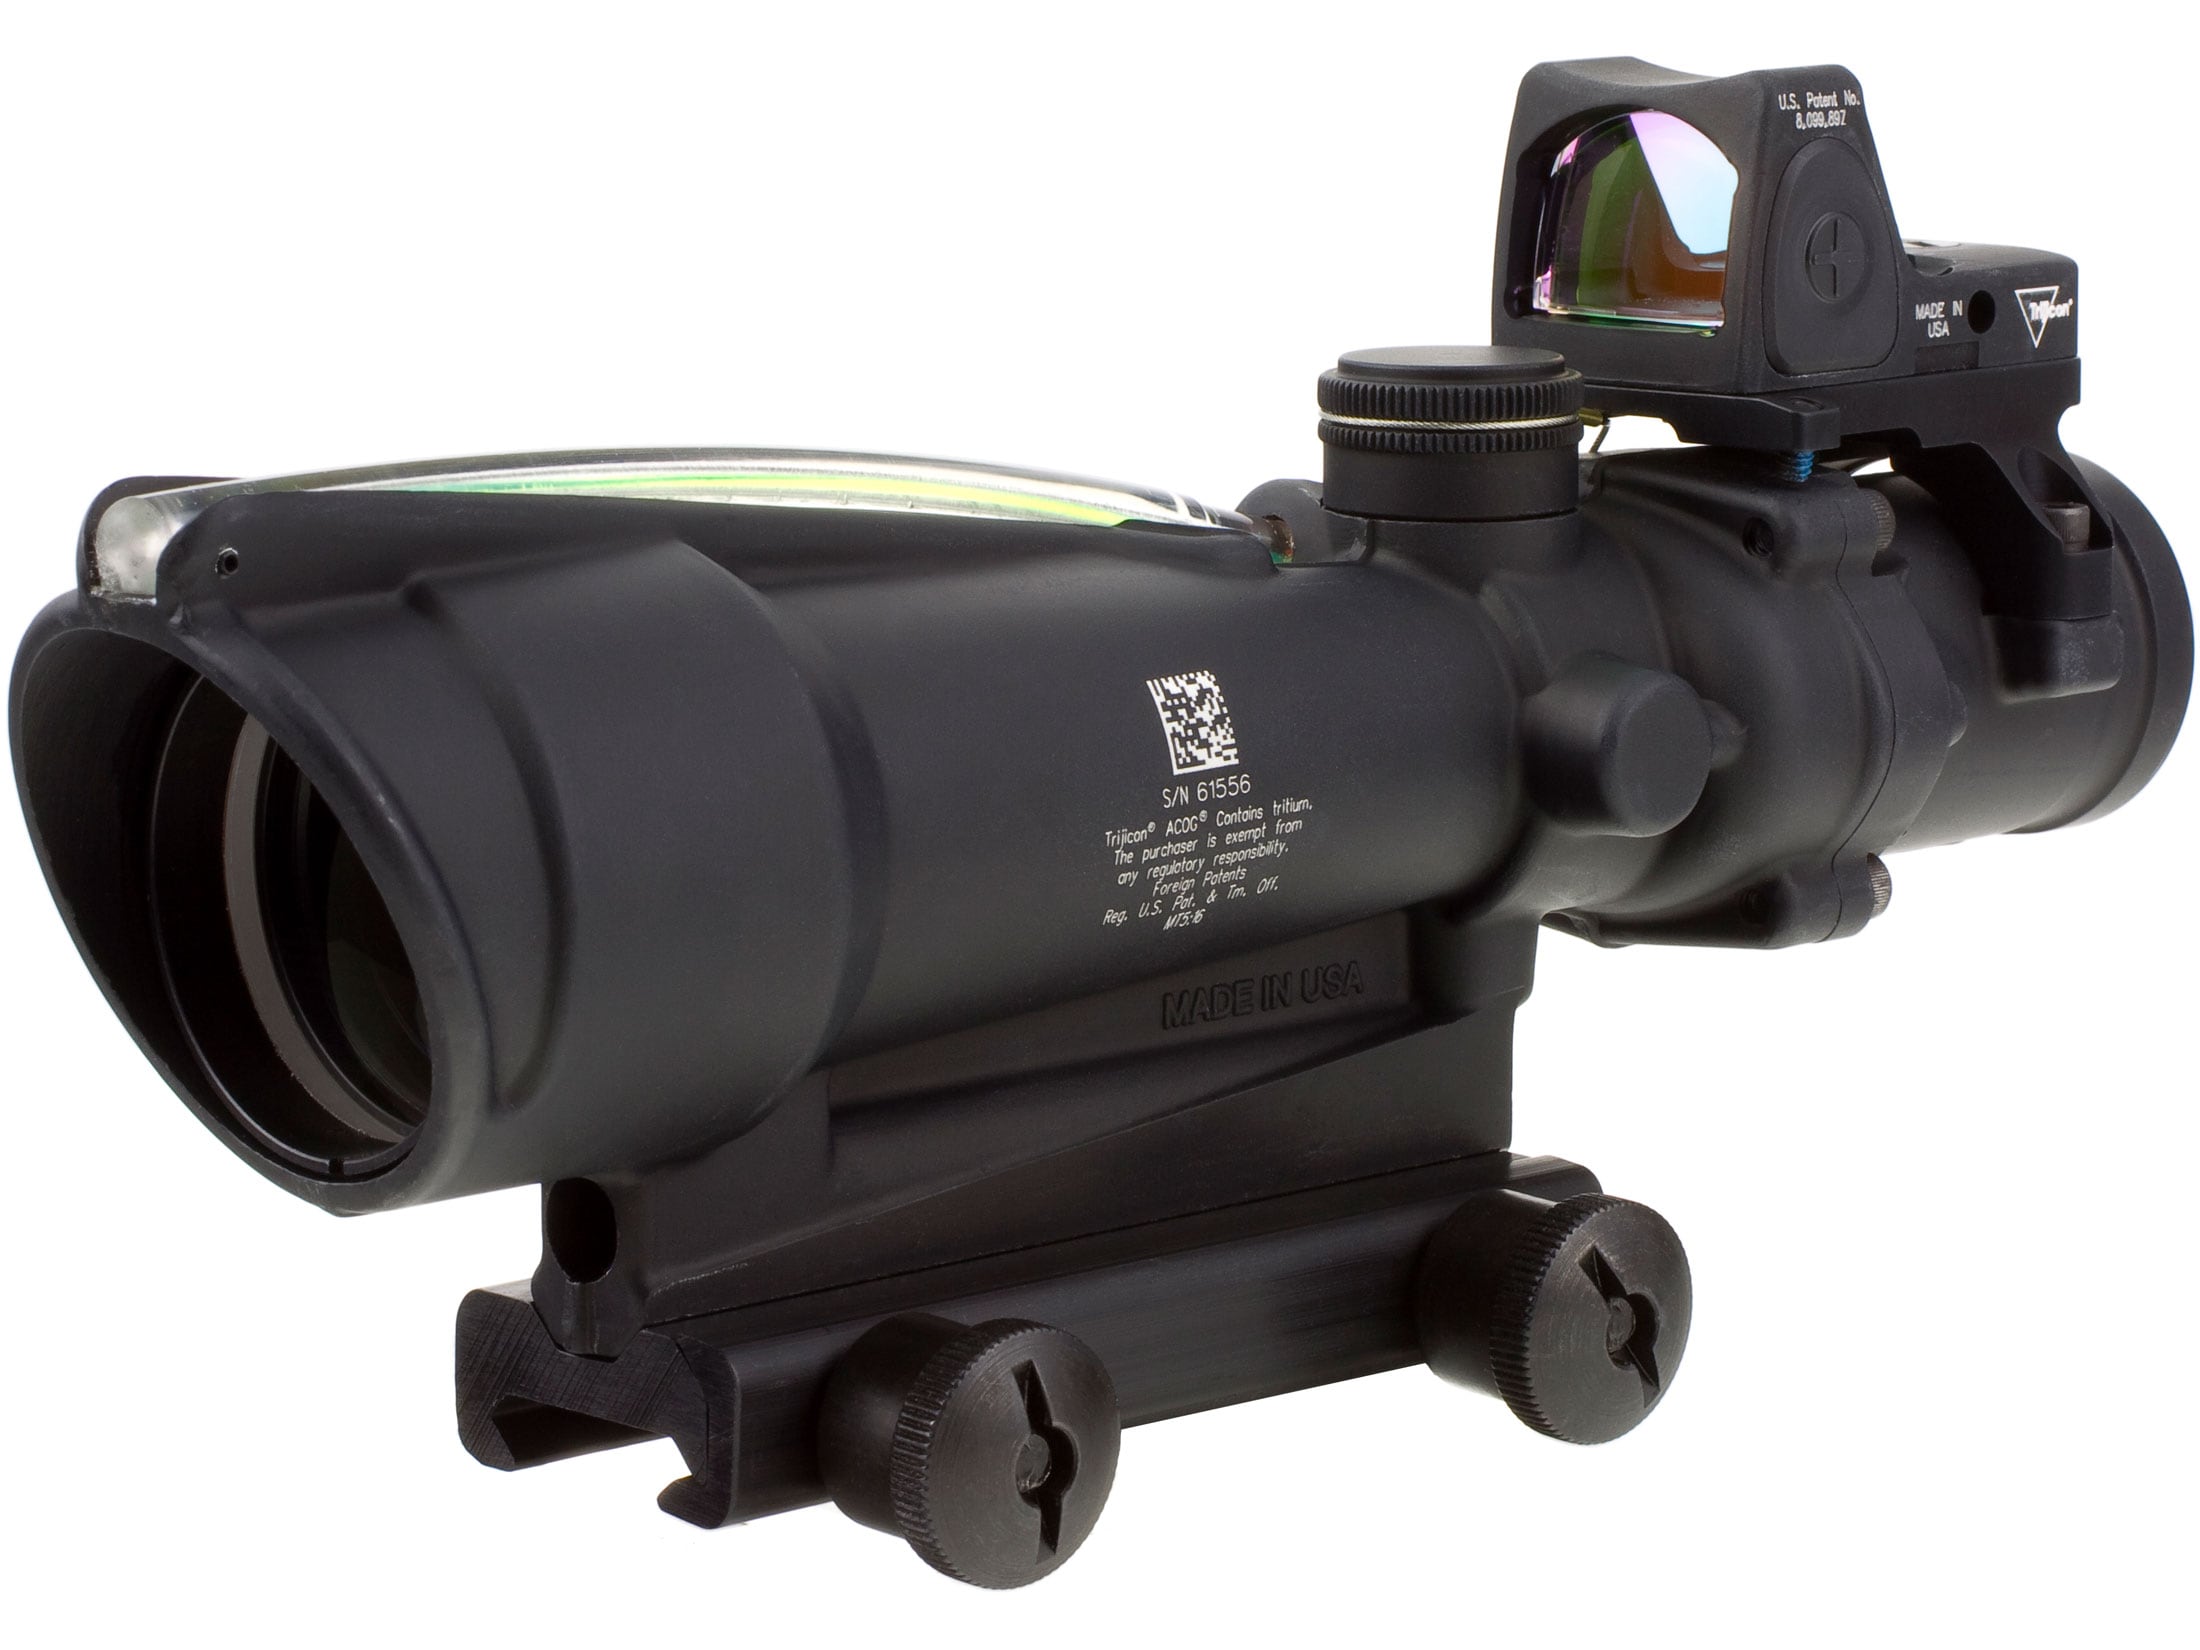 Trijicon ACOG Rifle Scope 3.5x 35mm Dual-Illuminated Green Chevron 223 Remington Reticle with 3.25 MOA RMR Type 2 Adjustable LED Red Dot Sight and Colt Knob Thumbscrew Mount Matte Black